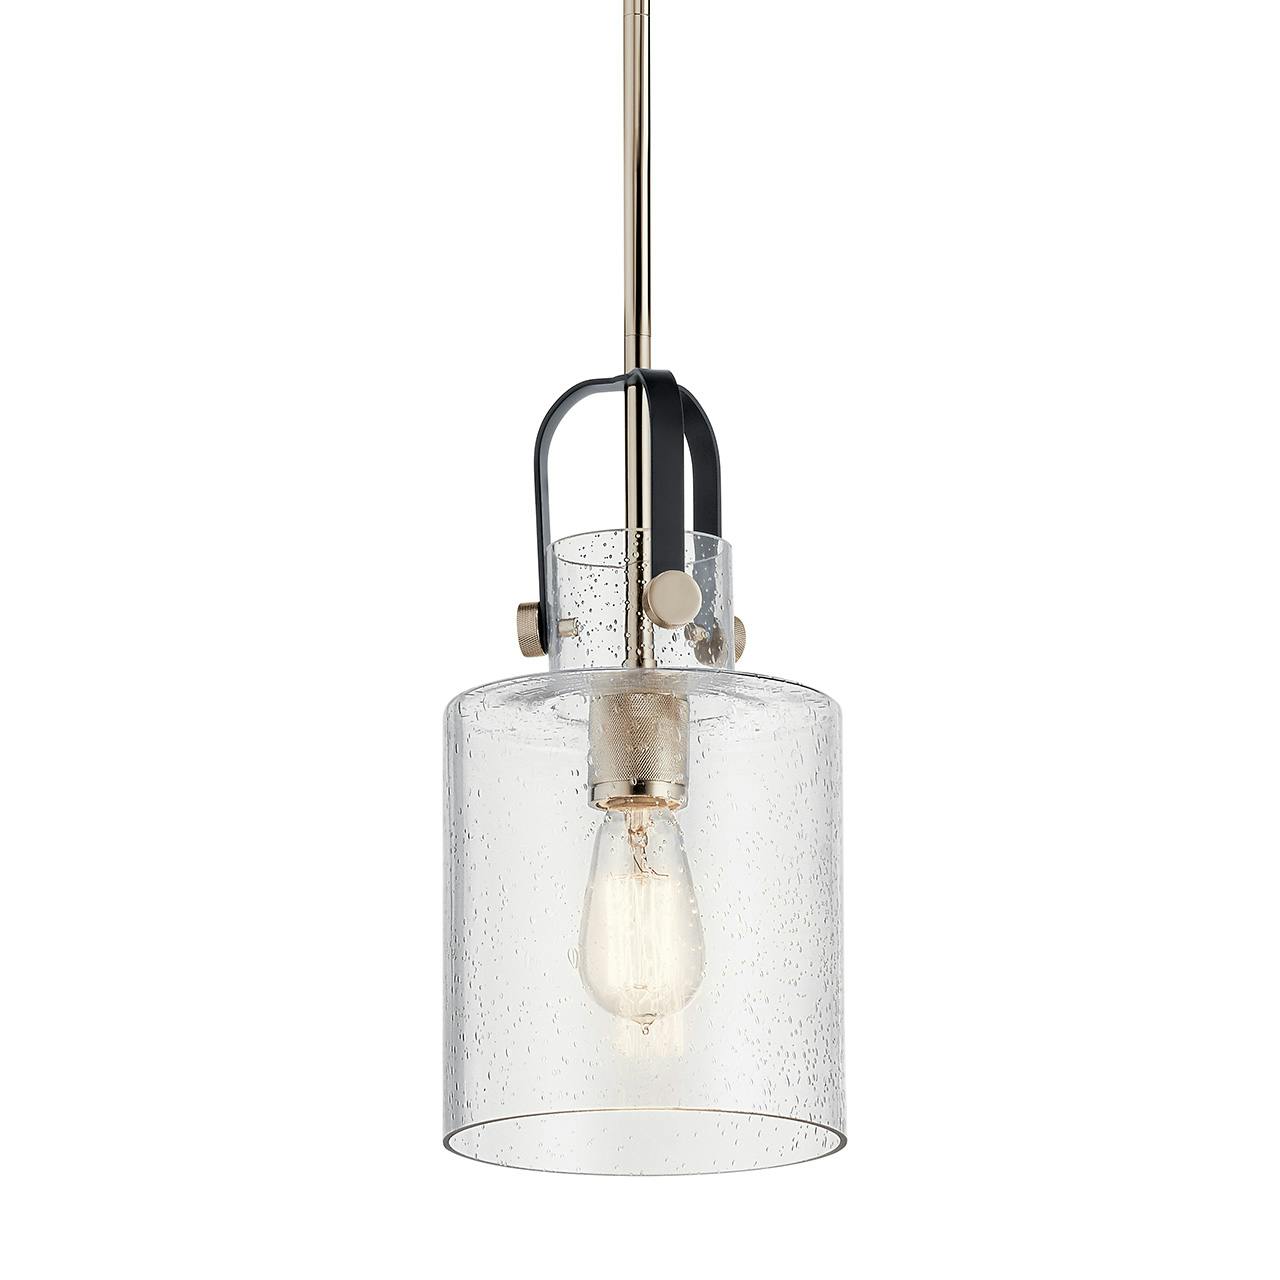 Kitner 7" Pendant Black and Nickel without the canopy on a white background